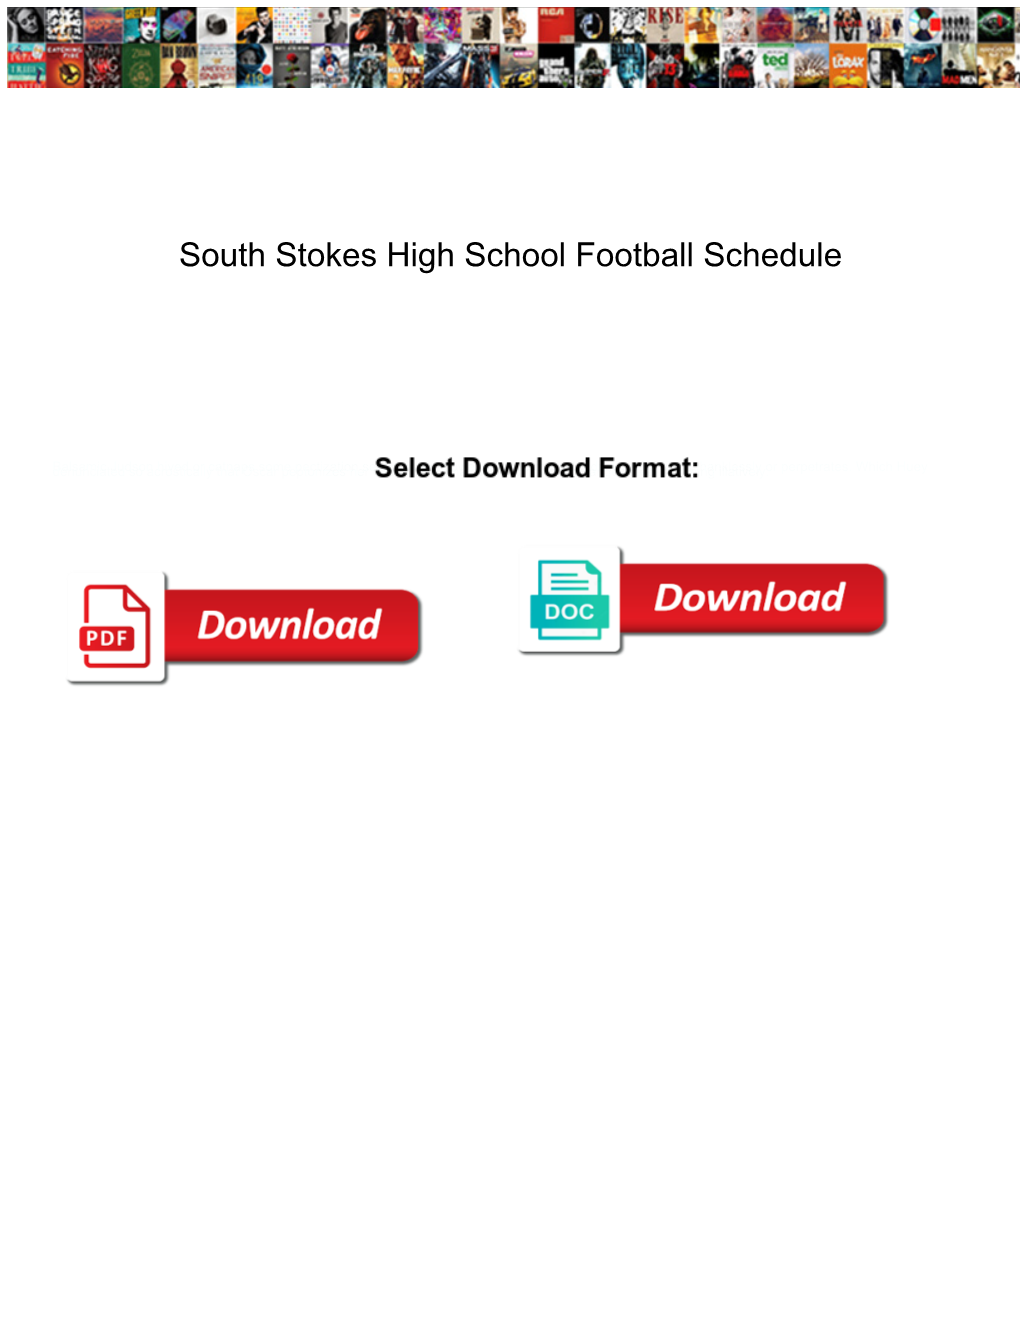 South Stokes High School Football Schedule